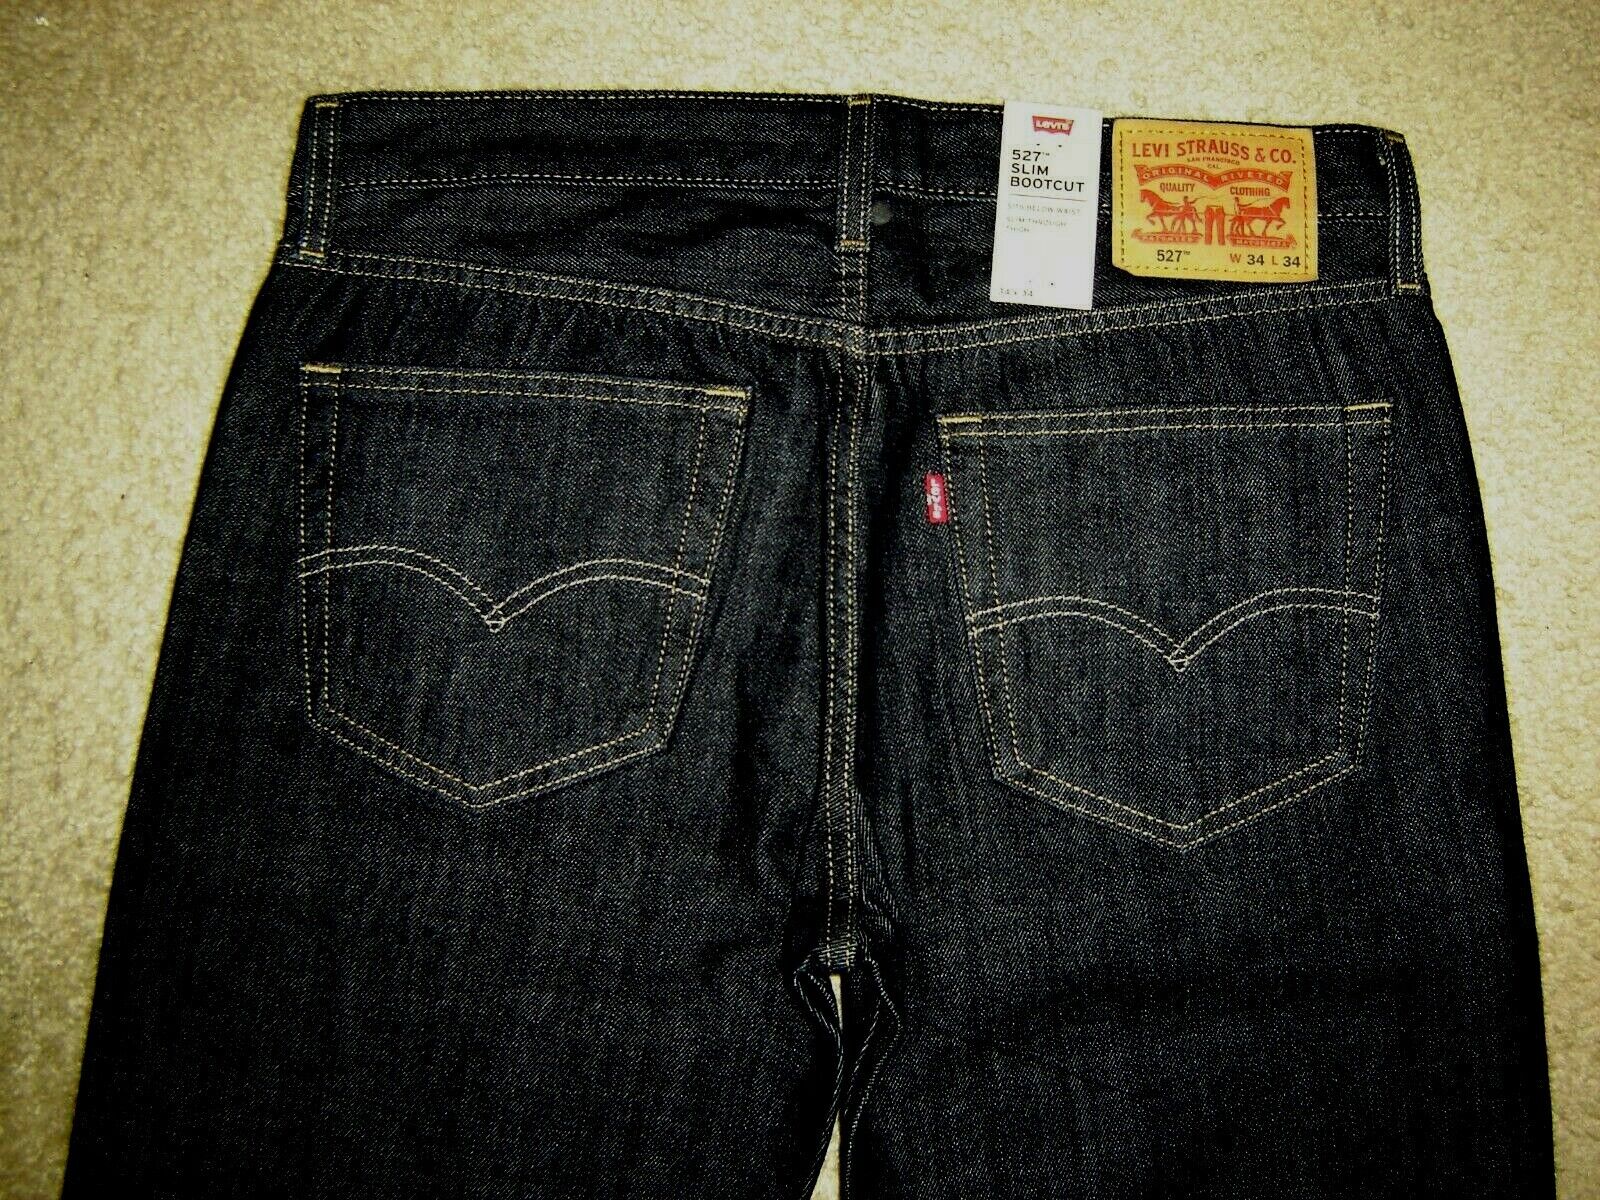 NWT Levi's 527 jeans 34 x 34 Slim Boot Cut Retail $70 Style # 05527-4010